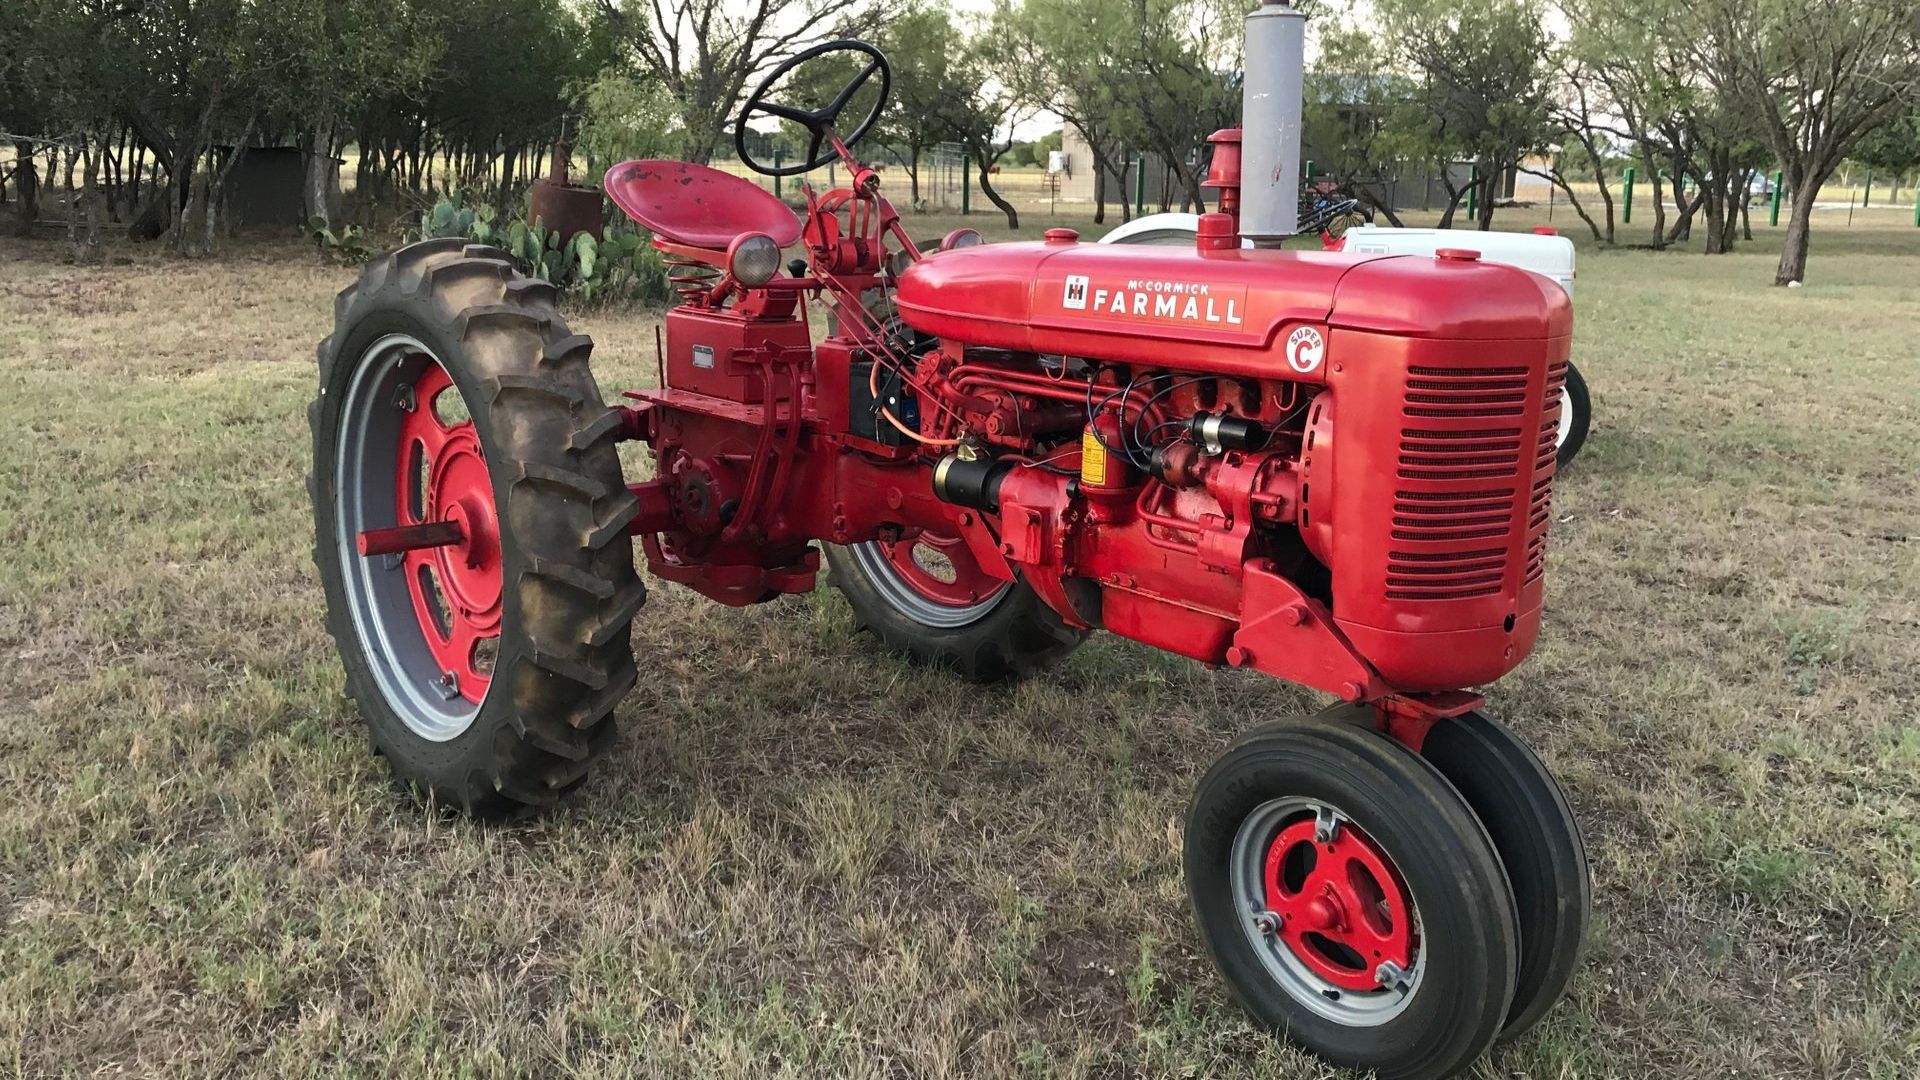 Add Variety To Your Collection With This 1952 International Harvester Super C 